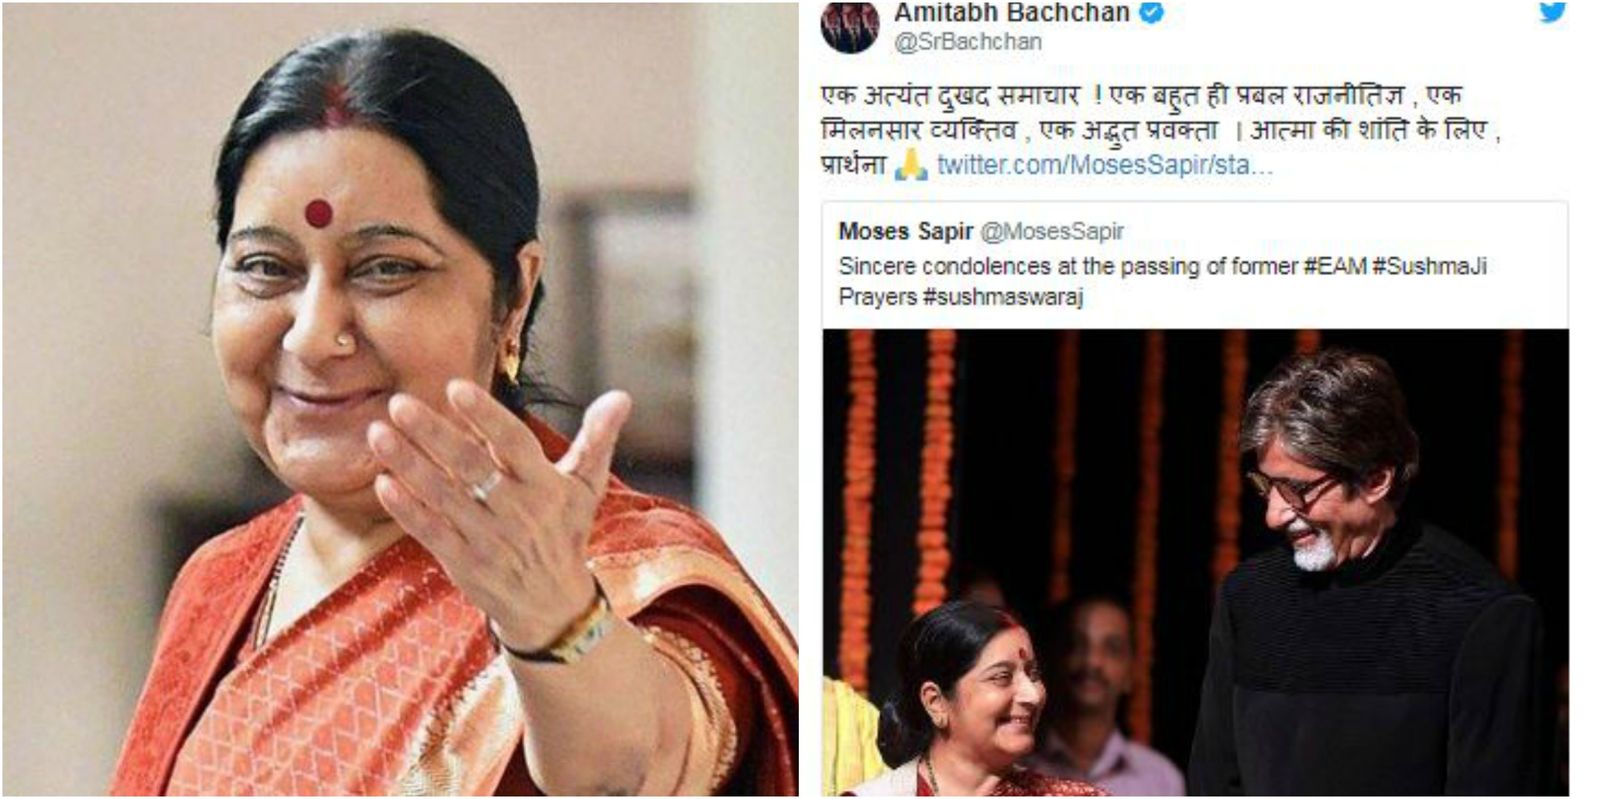 Sushma Swaraj Passes Away, Celebs Pay Their Respects To The Former Minister